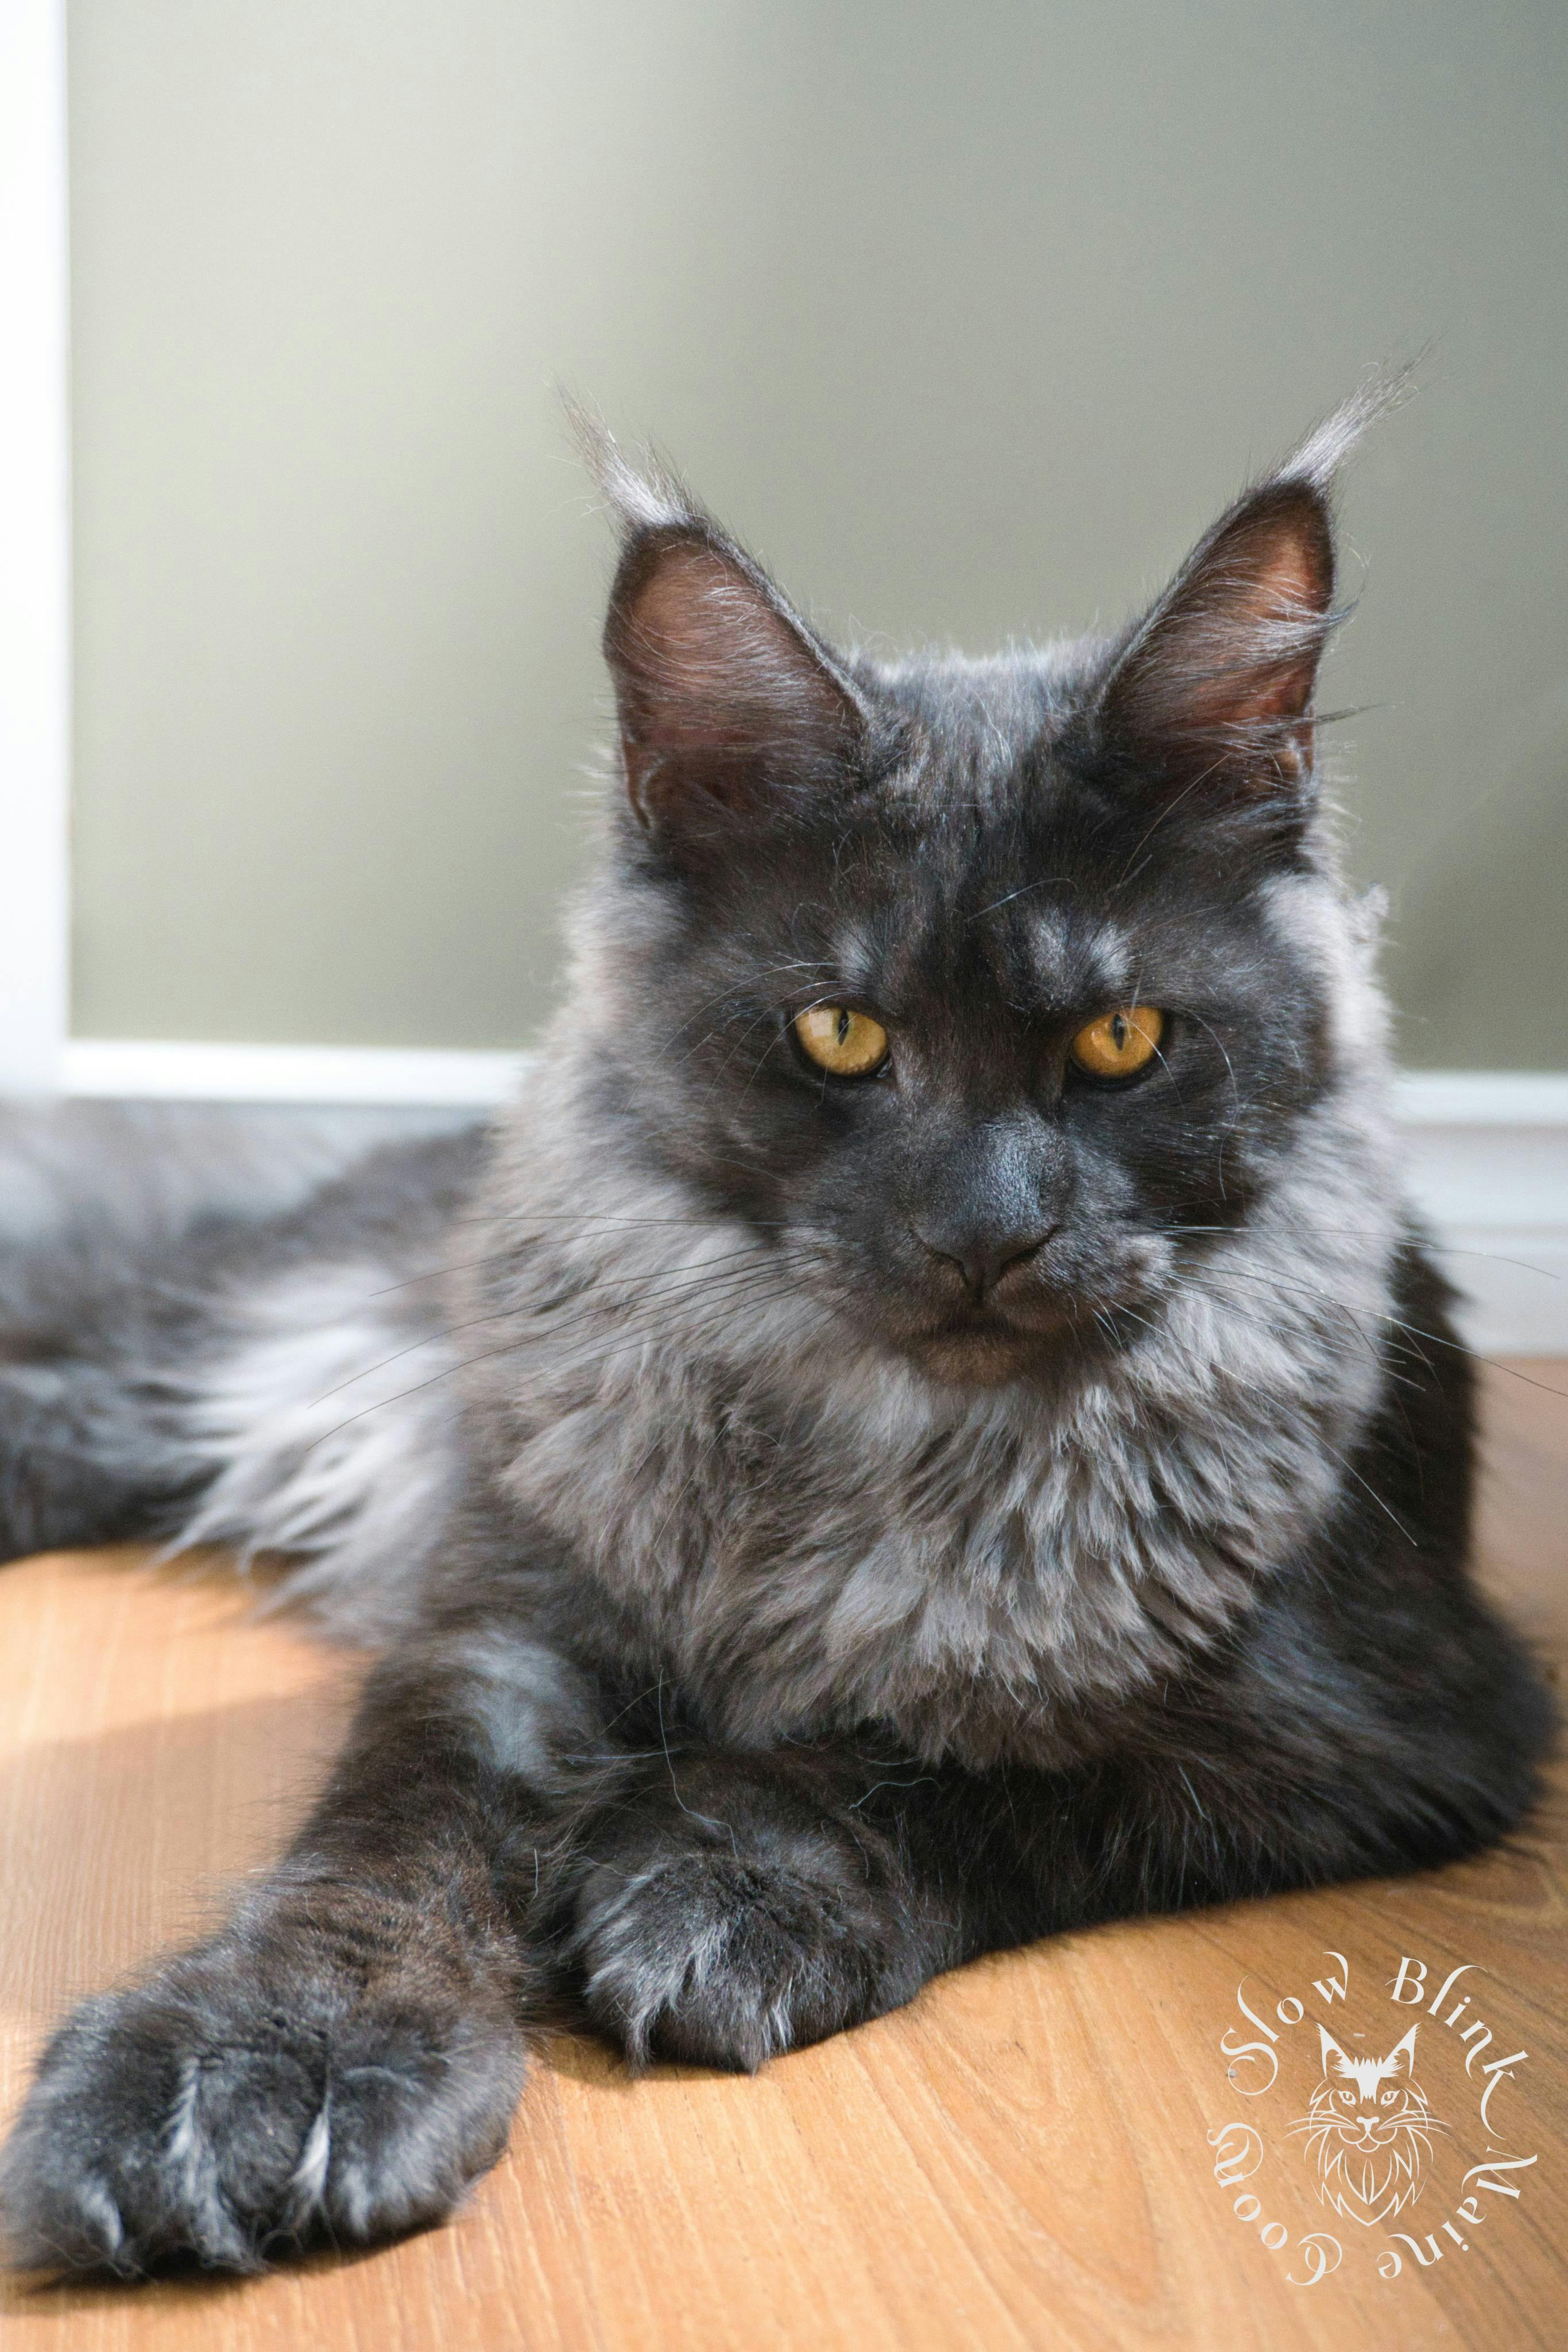 Black Smoke Maine Coon 6 month old female (named Persephone, future Queen of SlowBlink Maine Coons)